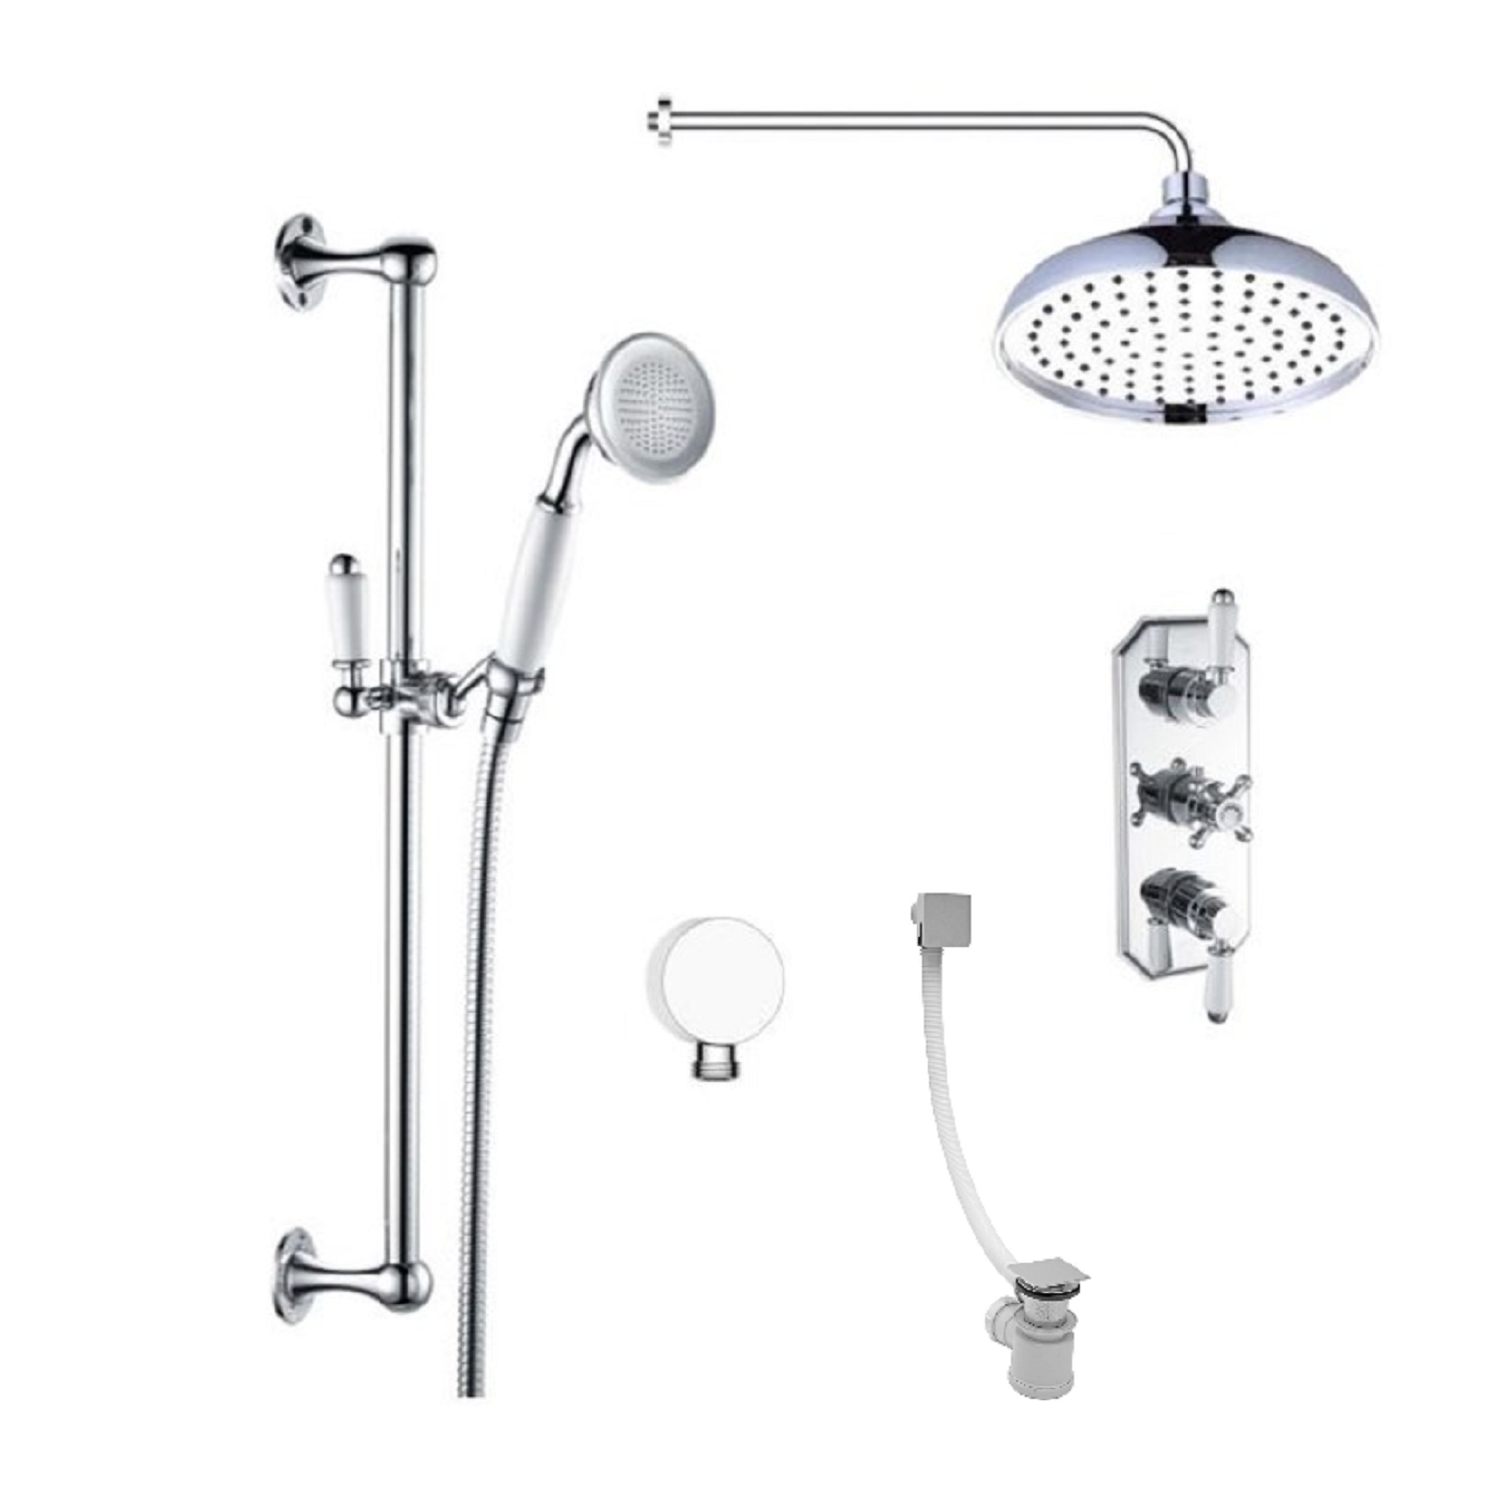 Traditional Three Handle Concealed Thermostatic Mixer Shower with Wall Mounted Shower Head Handset &